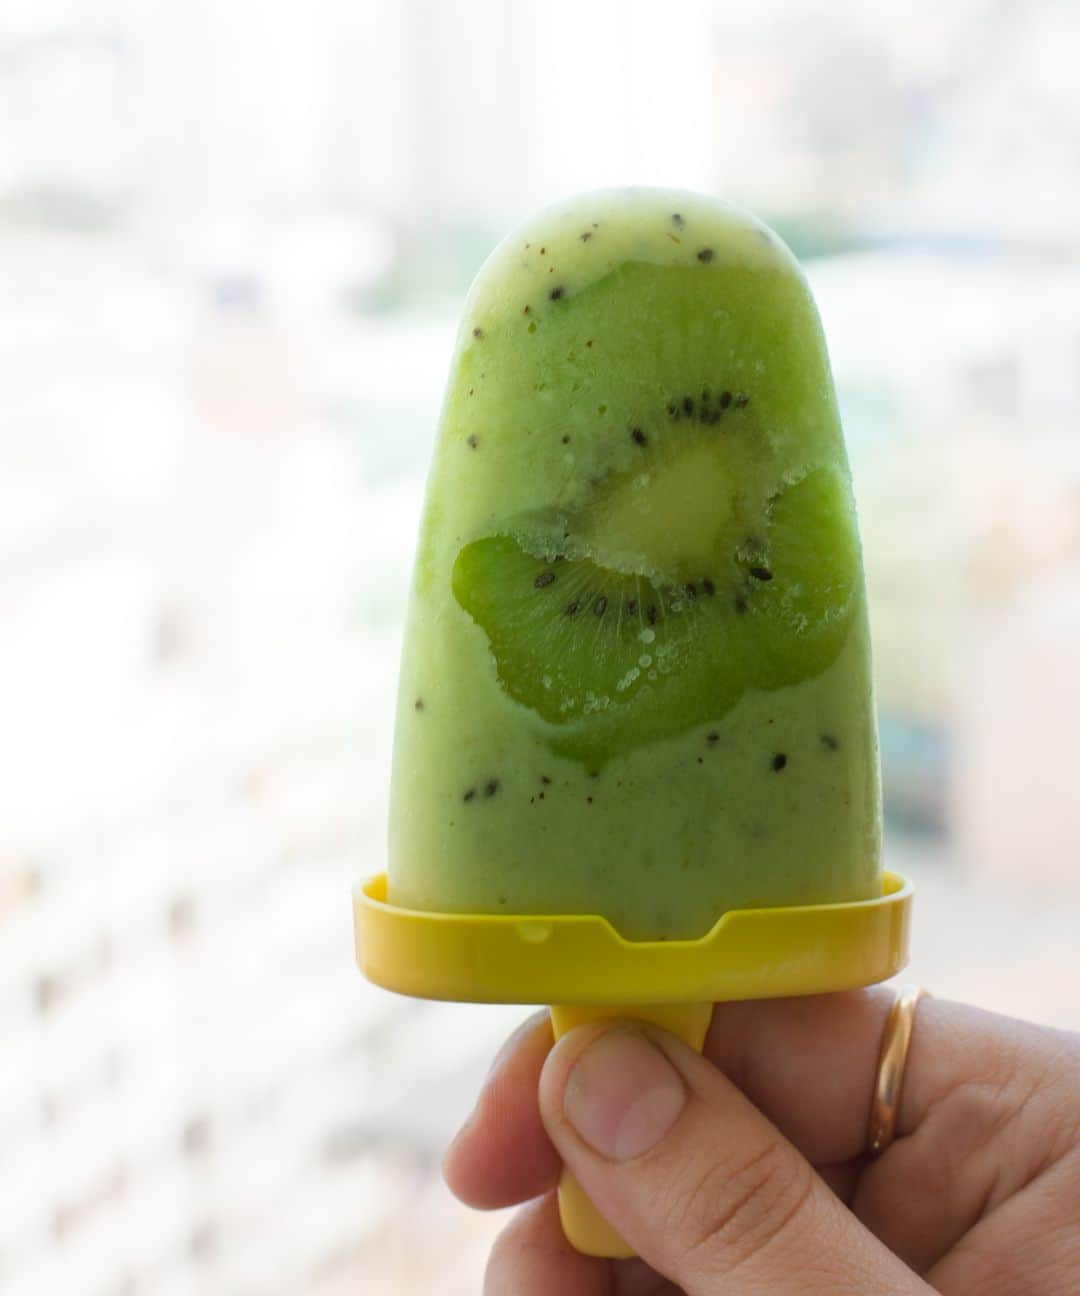 Archana's Kitchenのインスタグラム：「#kidssummerrecipes   A sugar free popsicle, this refreshing Kiwi Popsicles Recipe can be made in a jiffy. Store them in the freezer to beat the blazing summer heat!  Ingredients 100 grams Hung Curd (Greek Yogurt) 3 Kiwi 2 tablespoons Honey  👉To begin making the Kiwi Popsicles recipe, first peel the kiwis and cut them into round slices. 👉Next in a mixer grinder jar and add Greek yogurt, two kiwis, honey and blend everything together to form a thick puree.  Adjust the sweetness to your liking.  👉Pour the kiwi Popsicle mixture into the Popsicle molds and put the remaining kiwi slices in each of the mold. Freeze these Popsicle overnight. 👉Once you take out frozen Popsicle from fridge, run Popsicle molds under water to de mold the kiwi Popsicle. 👉Serve Kiwi Popsicle as a dessert after your delicious Italian meal of Aglio Olio Pasta and Perfect Gooey Mozzarella Garlic Bread Recipe.  Find 1000+ such recipes on our app "Archana's Kitchen" or website www.archanaskitchen.com . . . . . #icecream #popsicles #summer #summerecipes #ice #chilled #desserts #lunch #southindianfood #southindianrecipes #southindianfood #homemadefood #eatfit #cooking #food #healthyrecipes #foodphotography #recipeoftheday #comfortfood #deliciousfood #delicious #instayum #food」